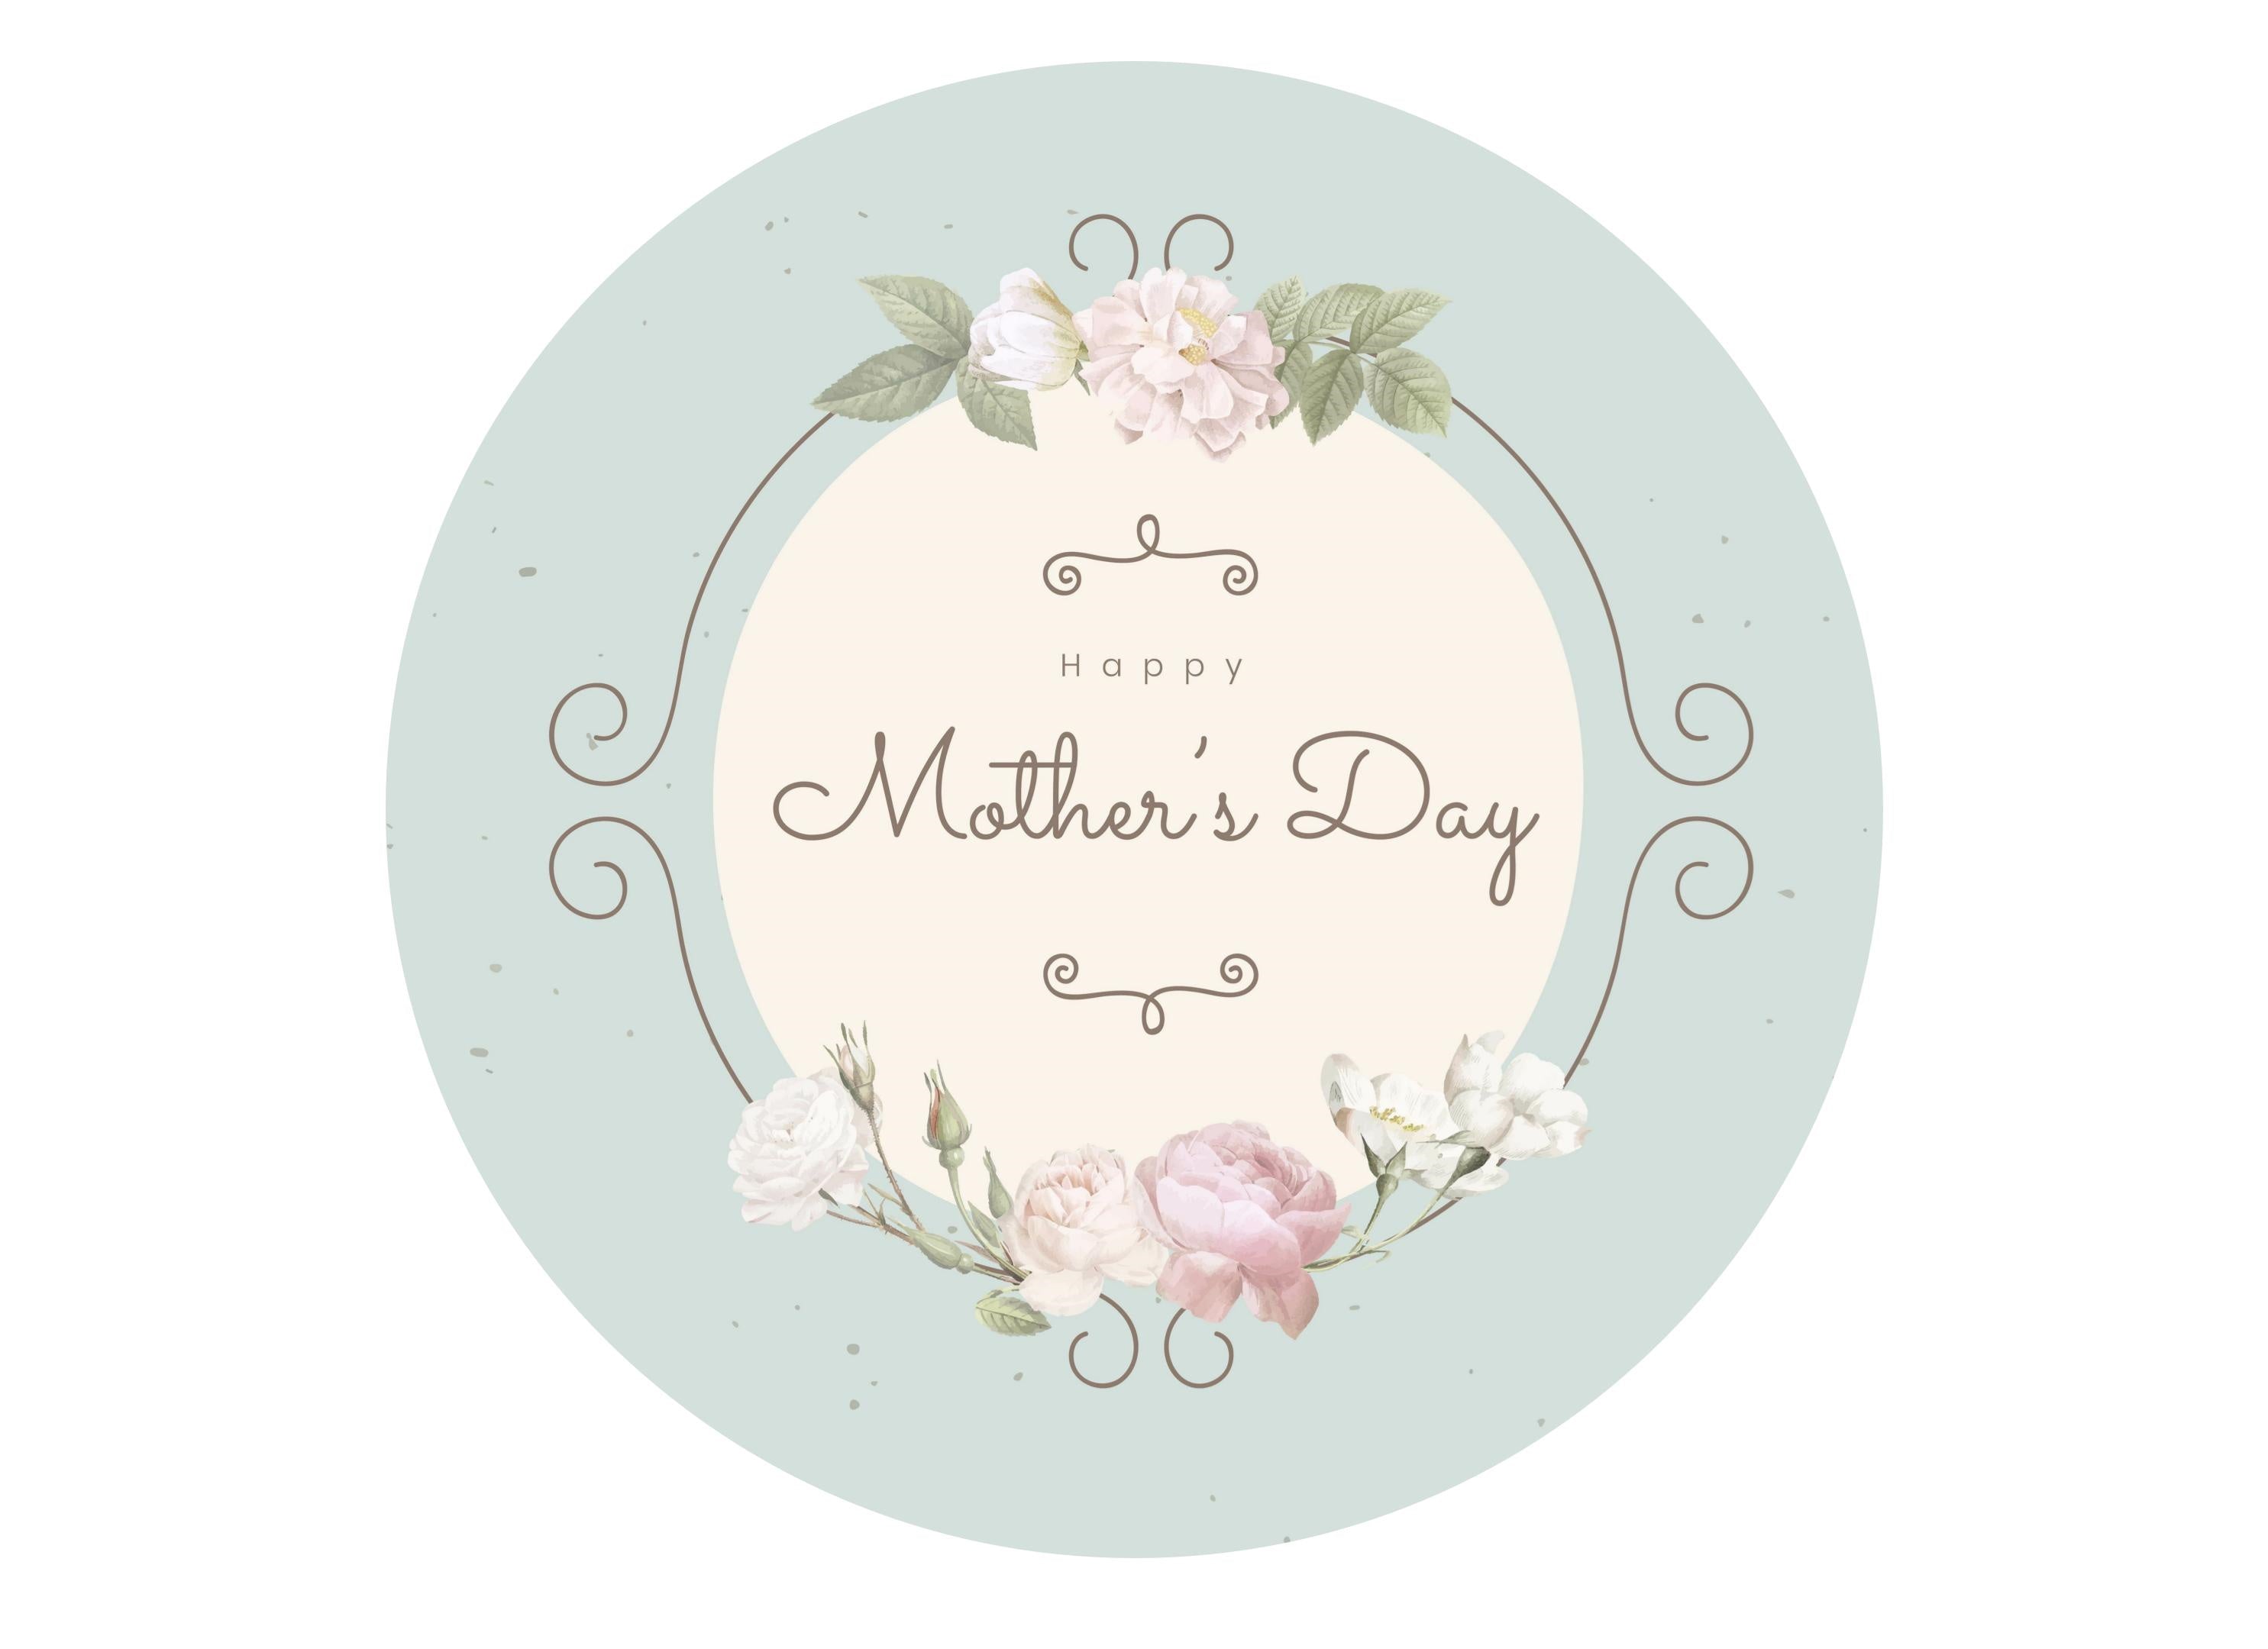 Large printed cake topper with a vintage theme to wish a Happy Mother's Day